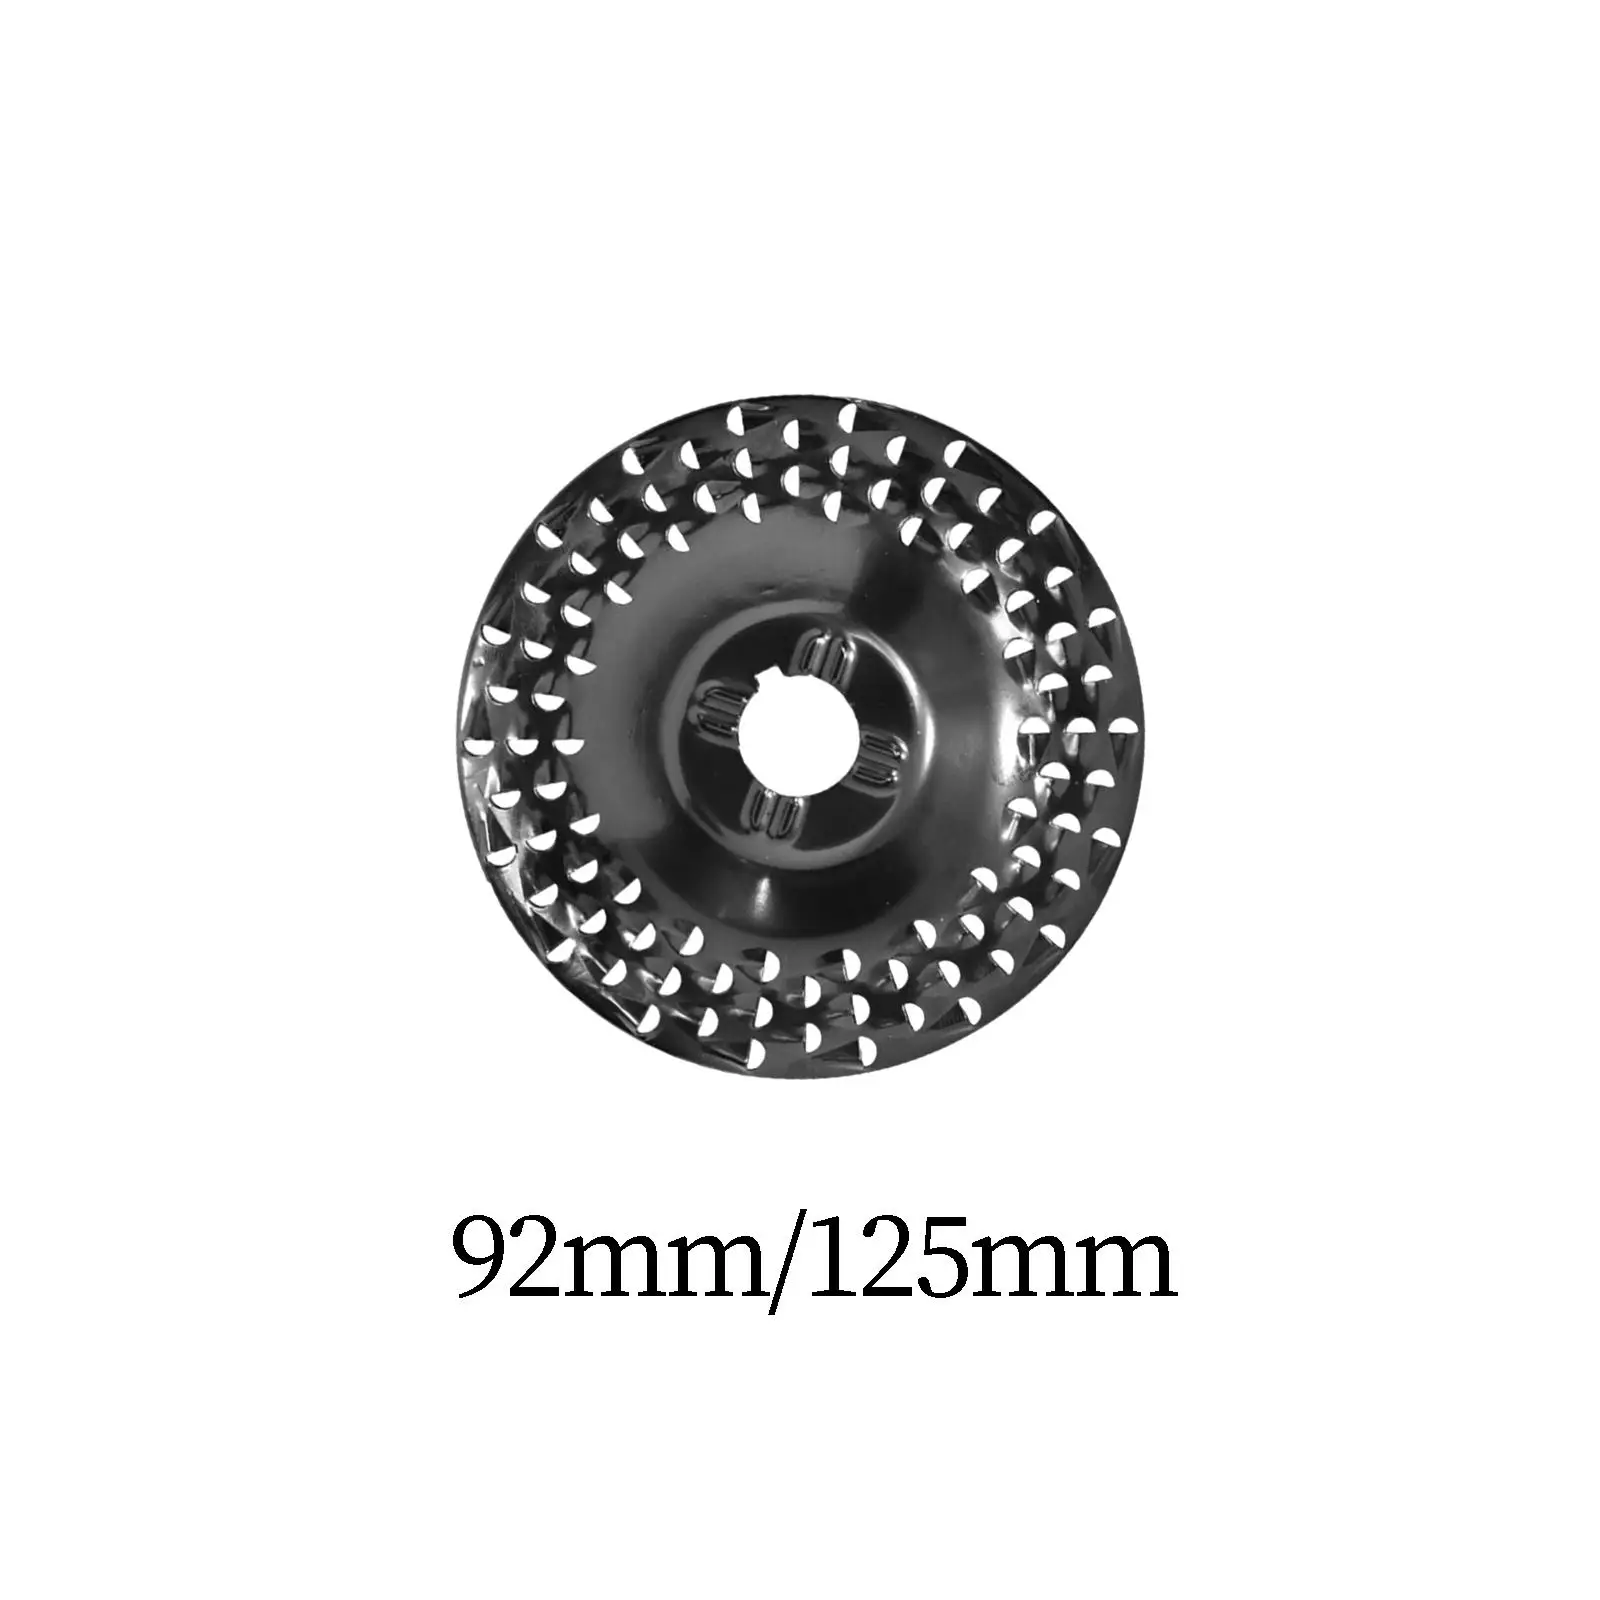 Grinder Wheel Disc for Angle Grinders Wood Trimming Spare Parts Durable Angle Grinder Wheel Portable Angle Grinder Carving Disc